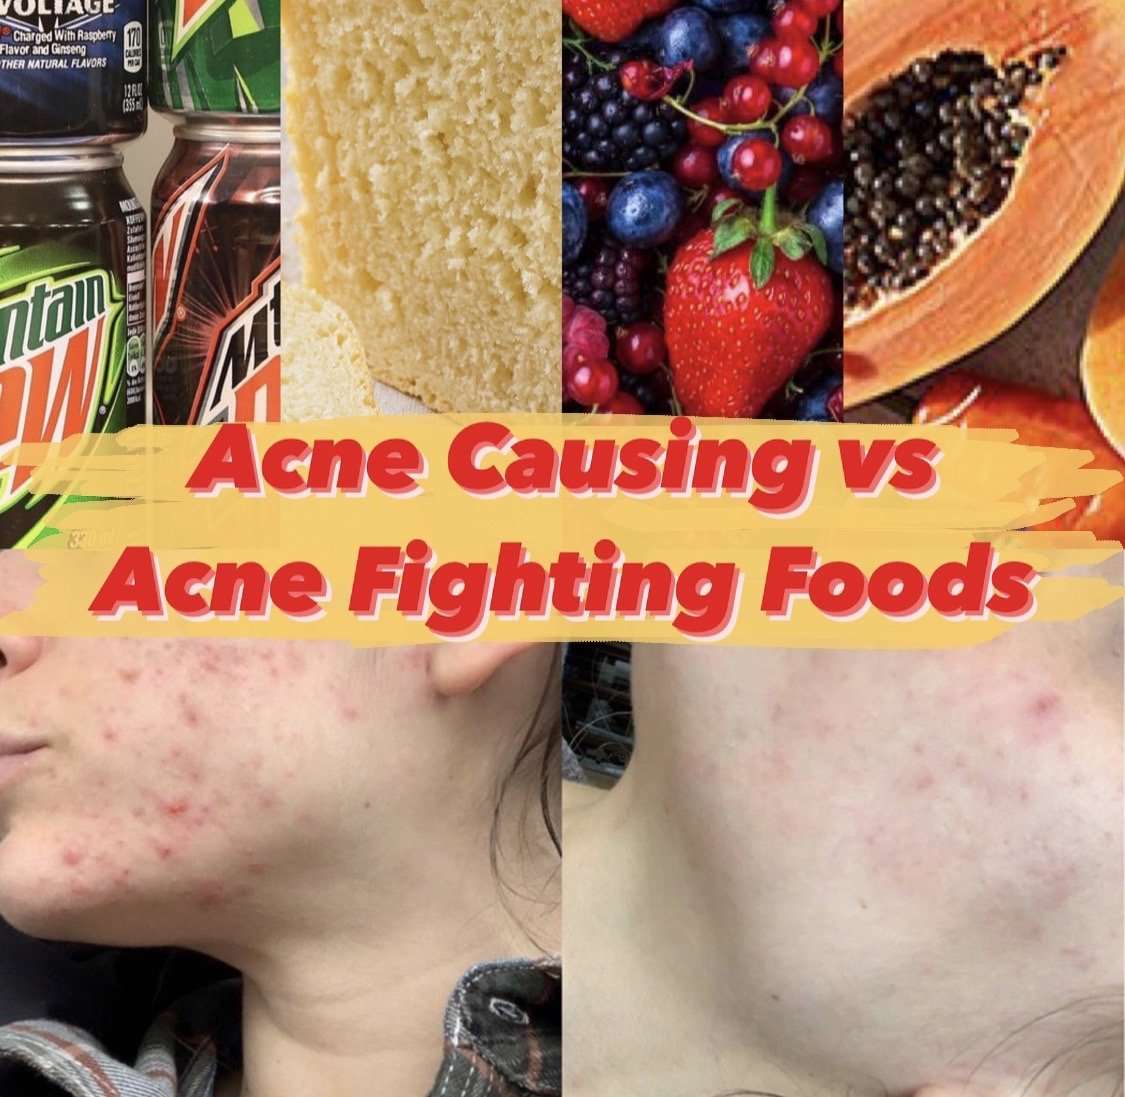 Acne Causing vs Acne Fighting Foods